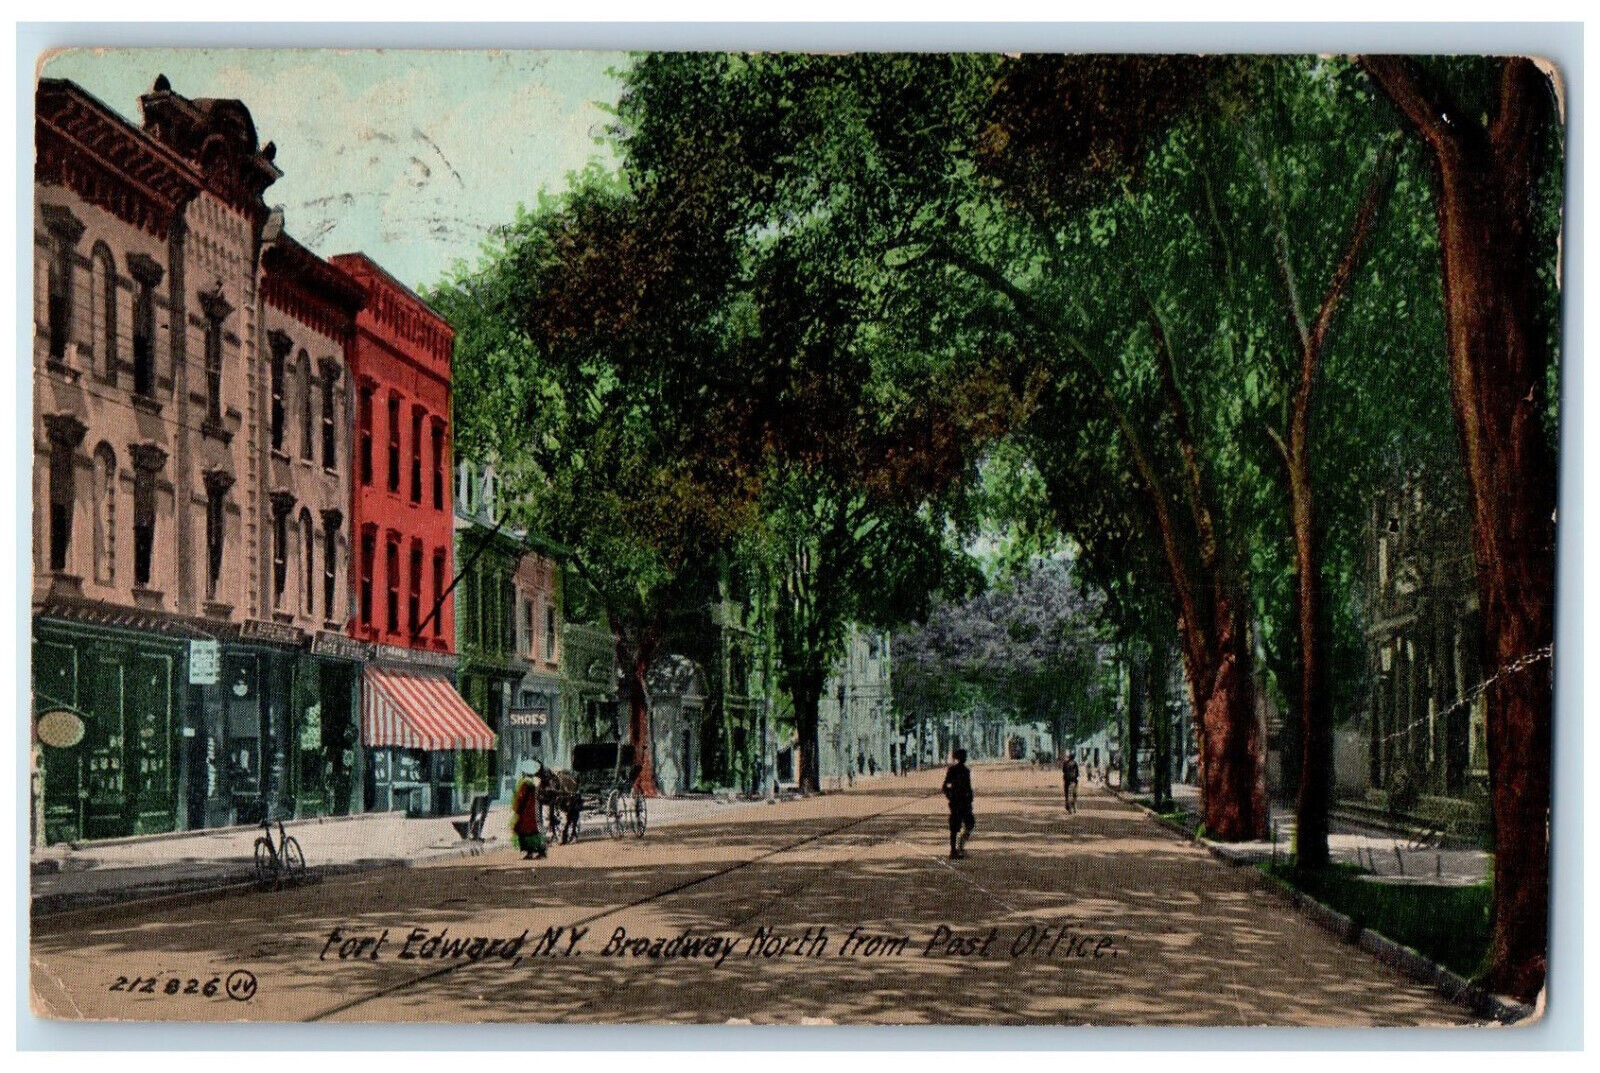 1912 Broadway North From Post Office Fort Edward New York NY Antique Postcard